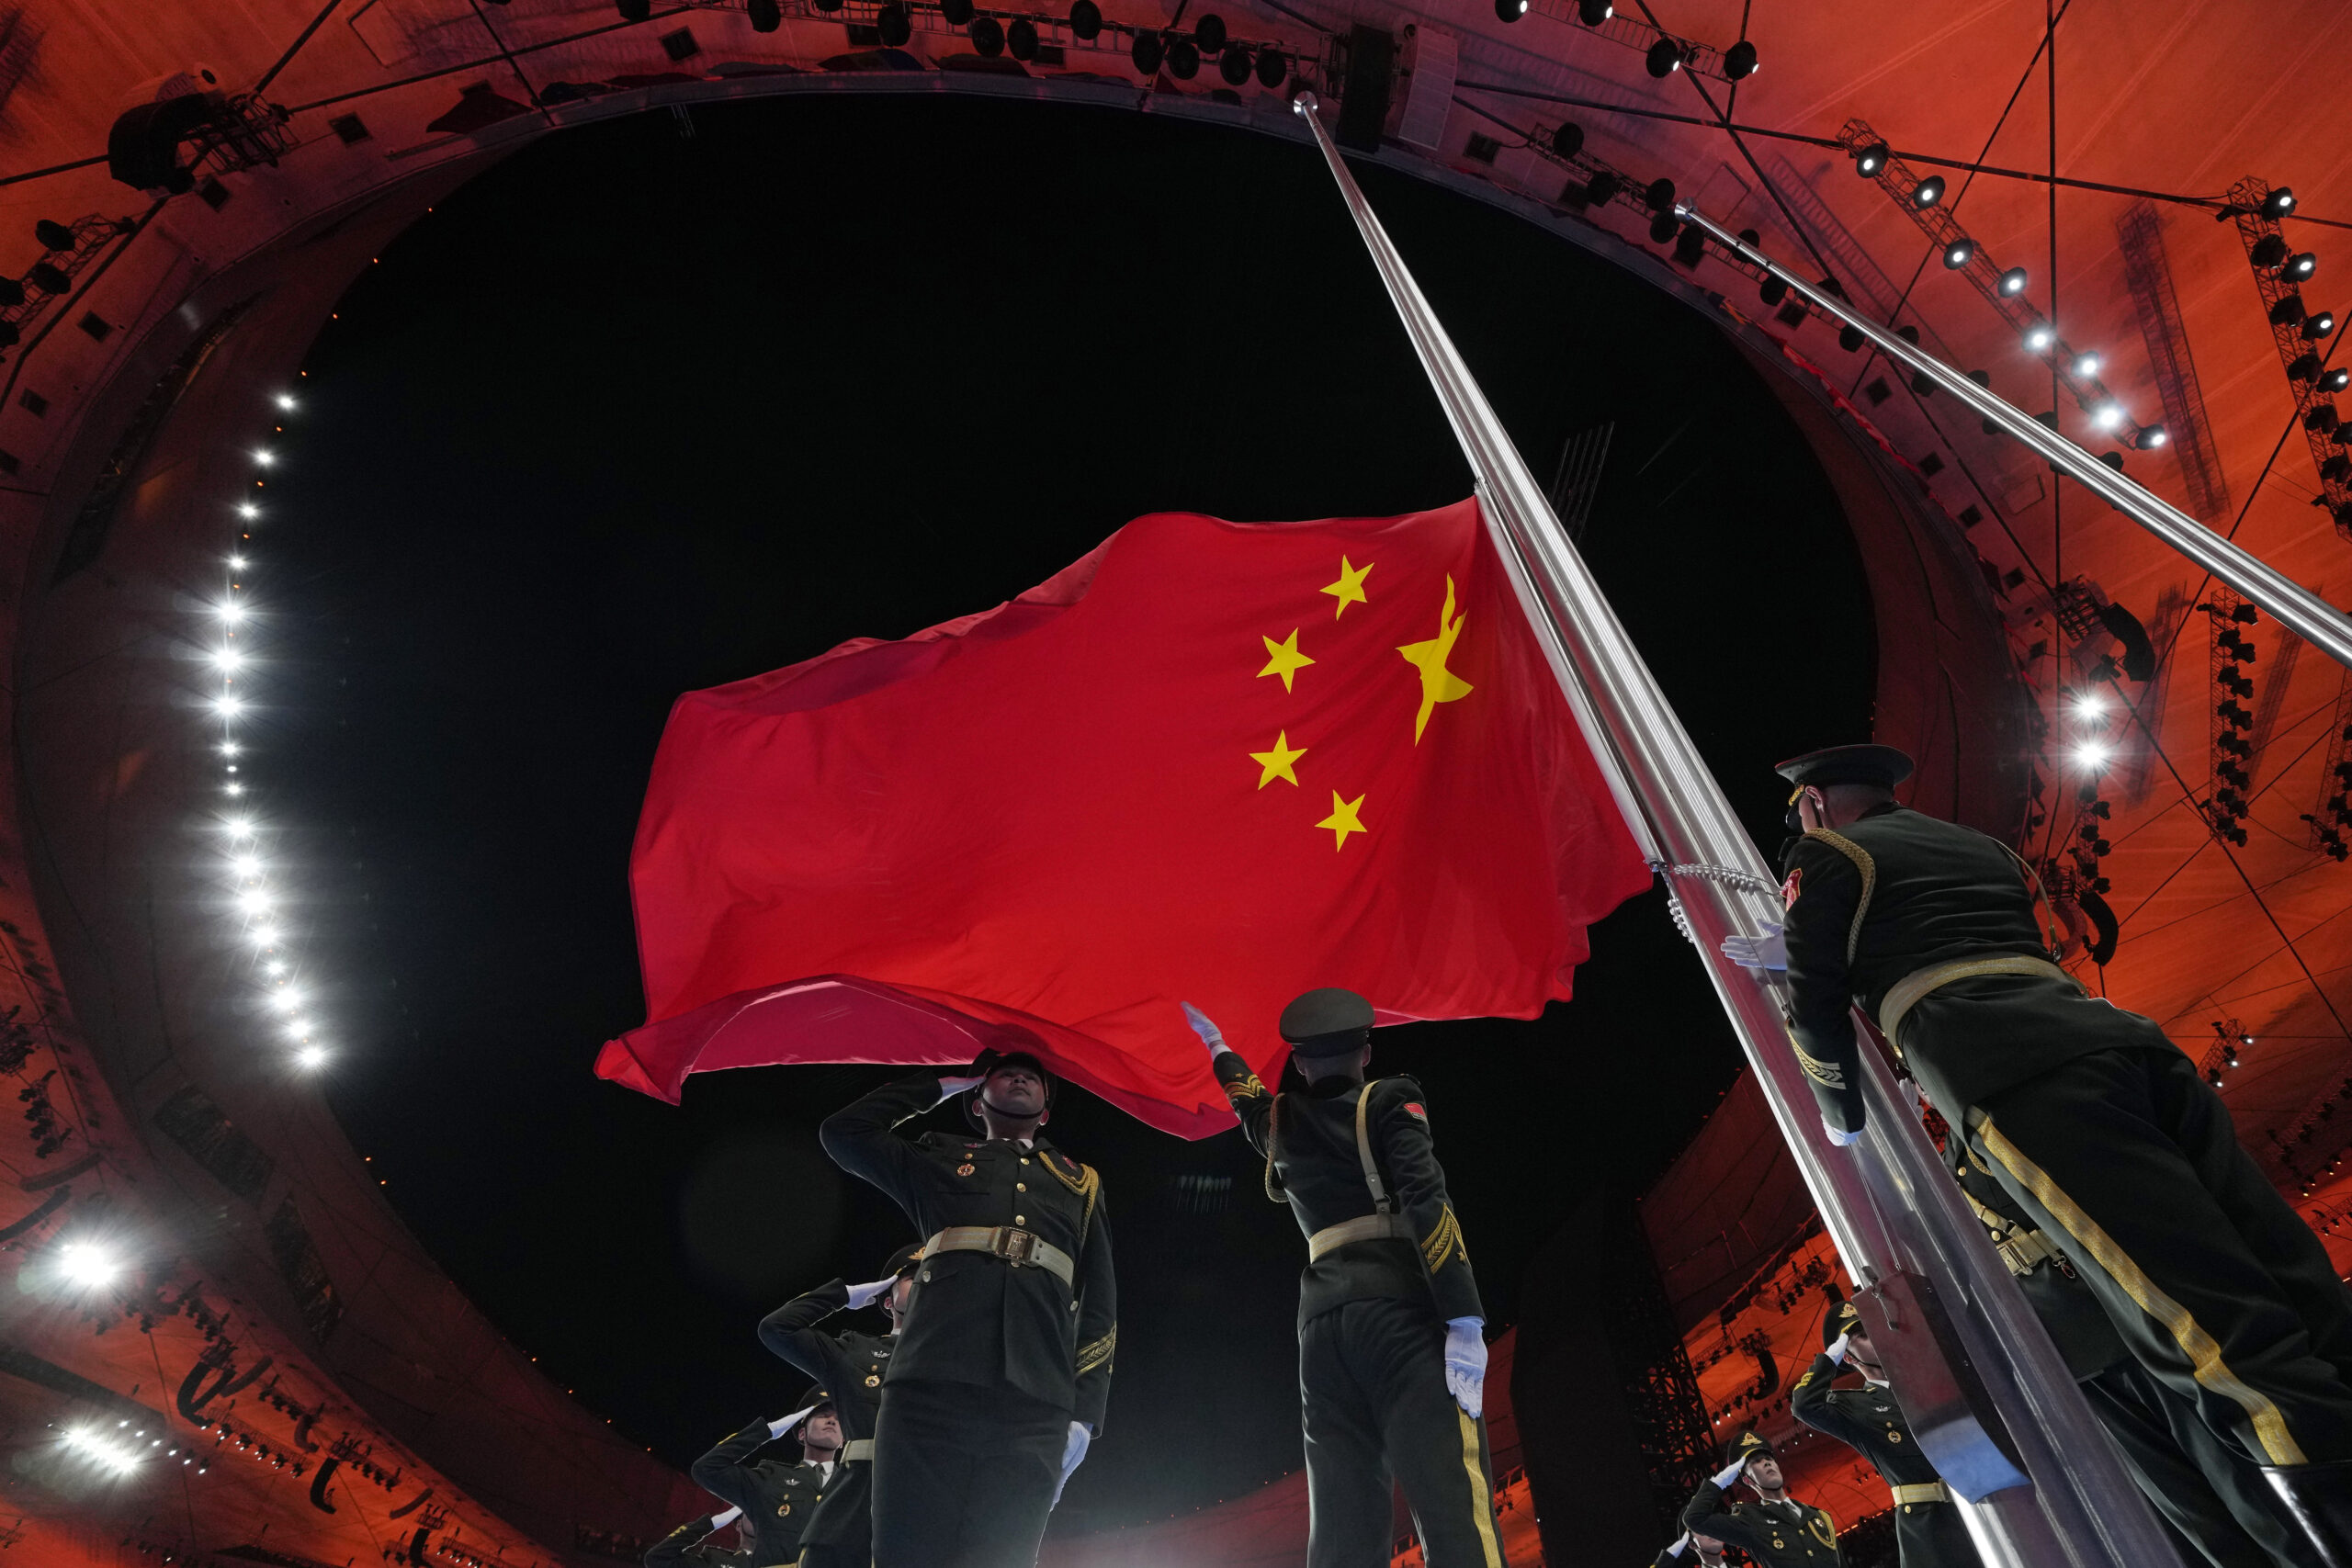 The Chinese national flag is raised during the opening ceremony of the 2022 Winter Olympics, Friday, Feb. 4, 2022, in Beijing. (AP Photo/Natacha Pisarenko)